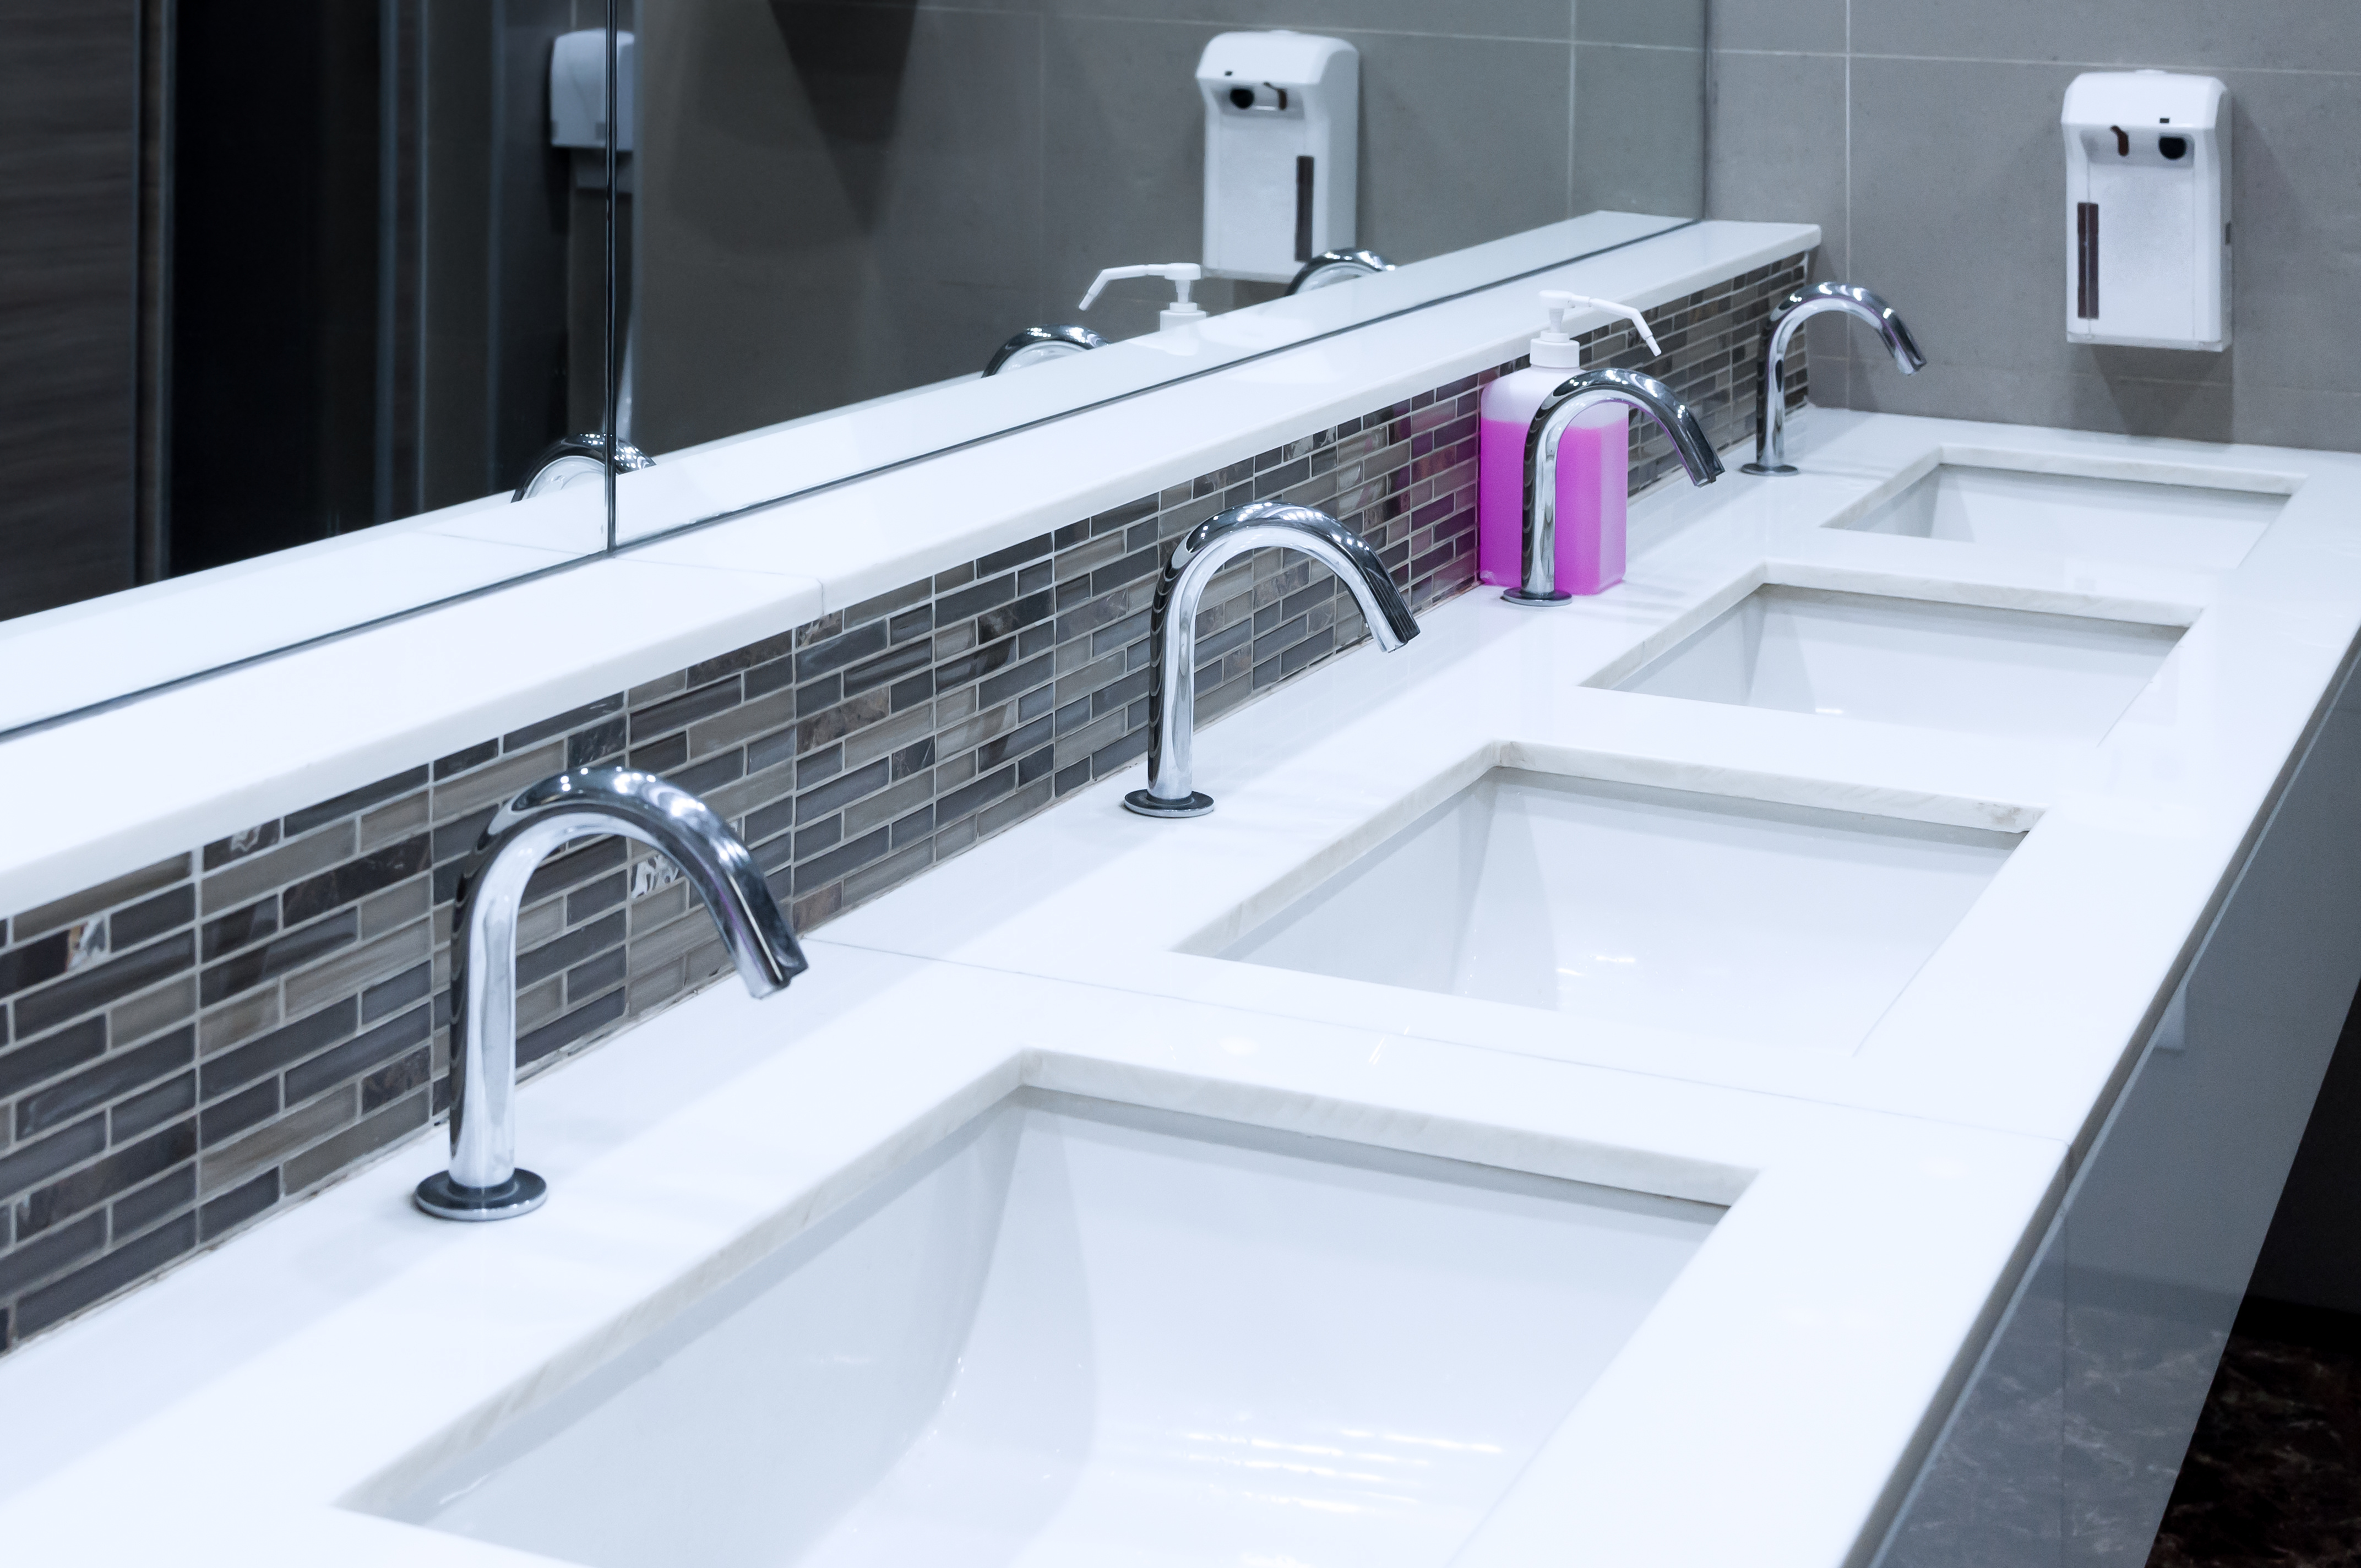 A row of sinks in a commercial plumbing project - if you are in need of services, contact WyattWorks today!